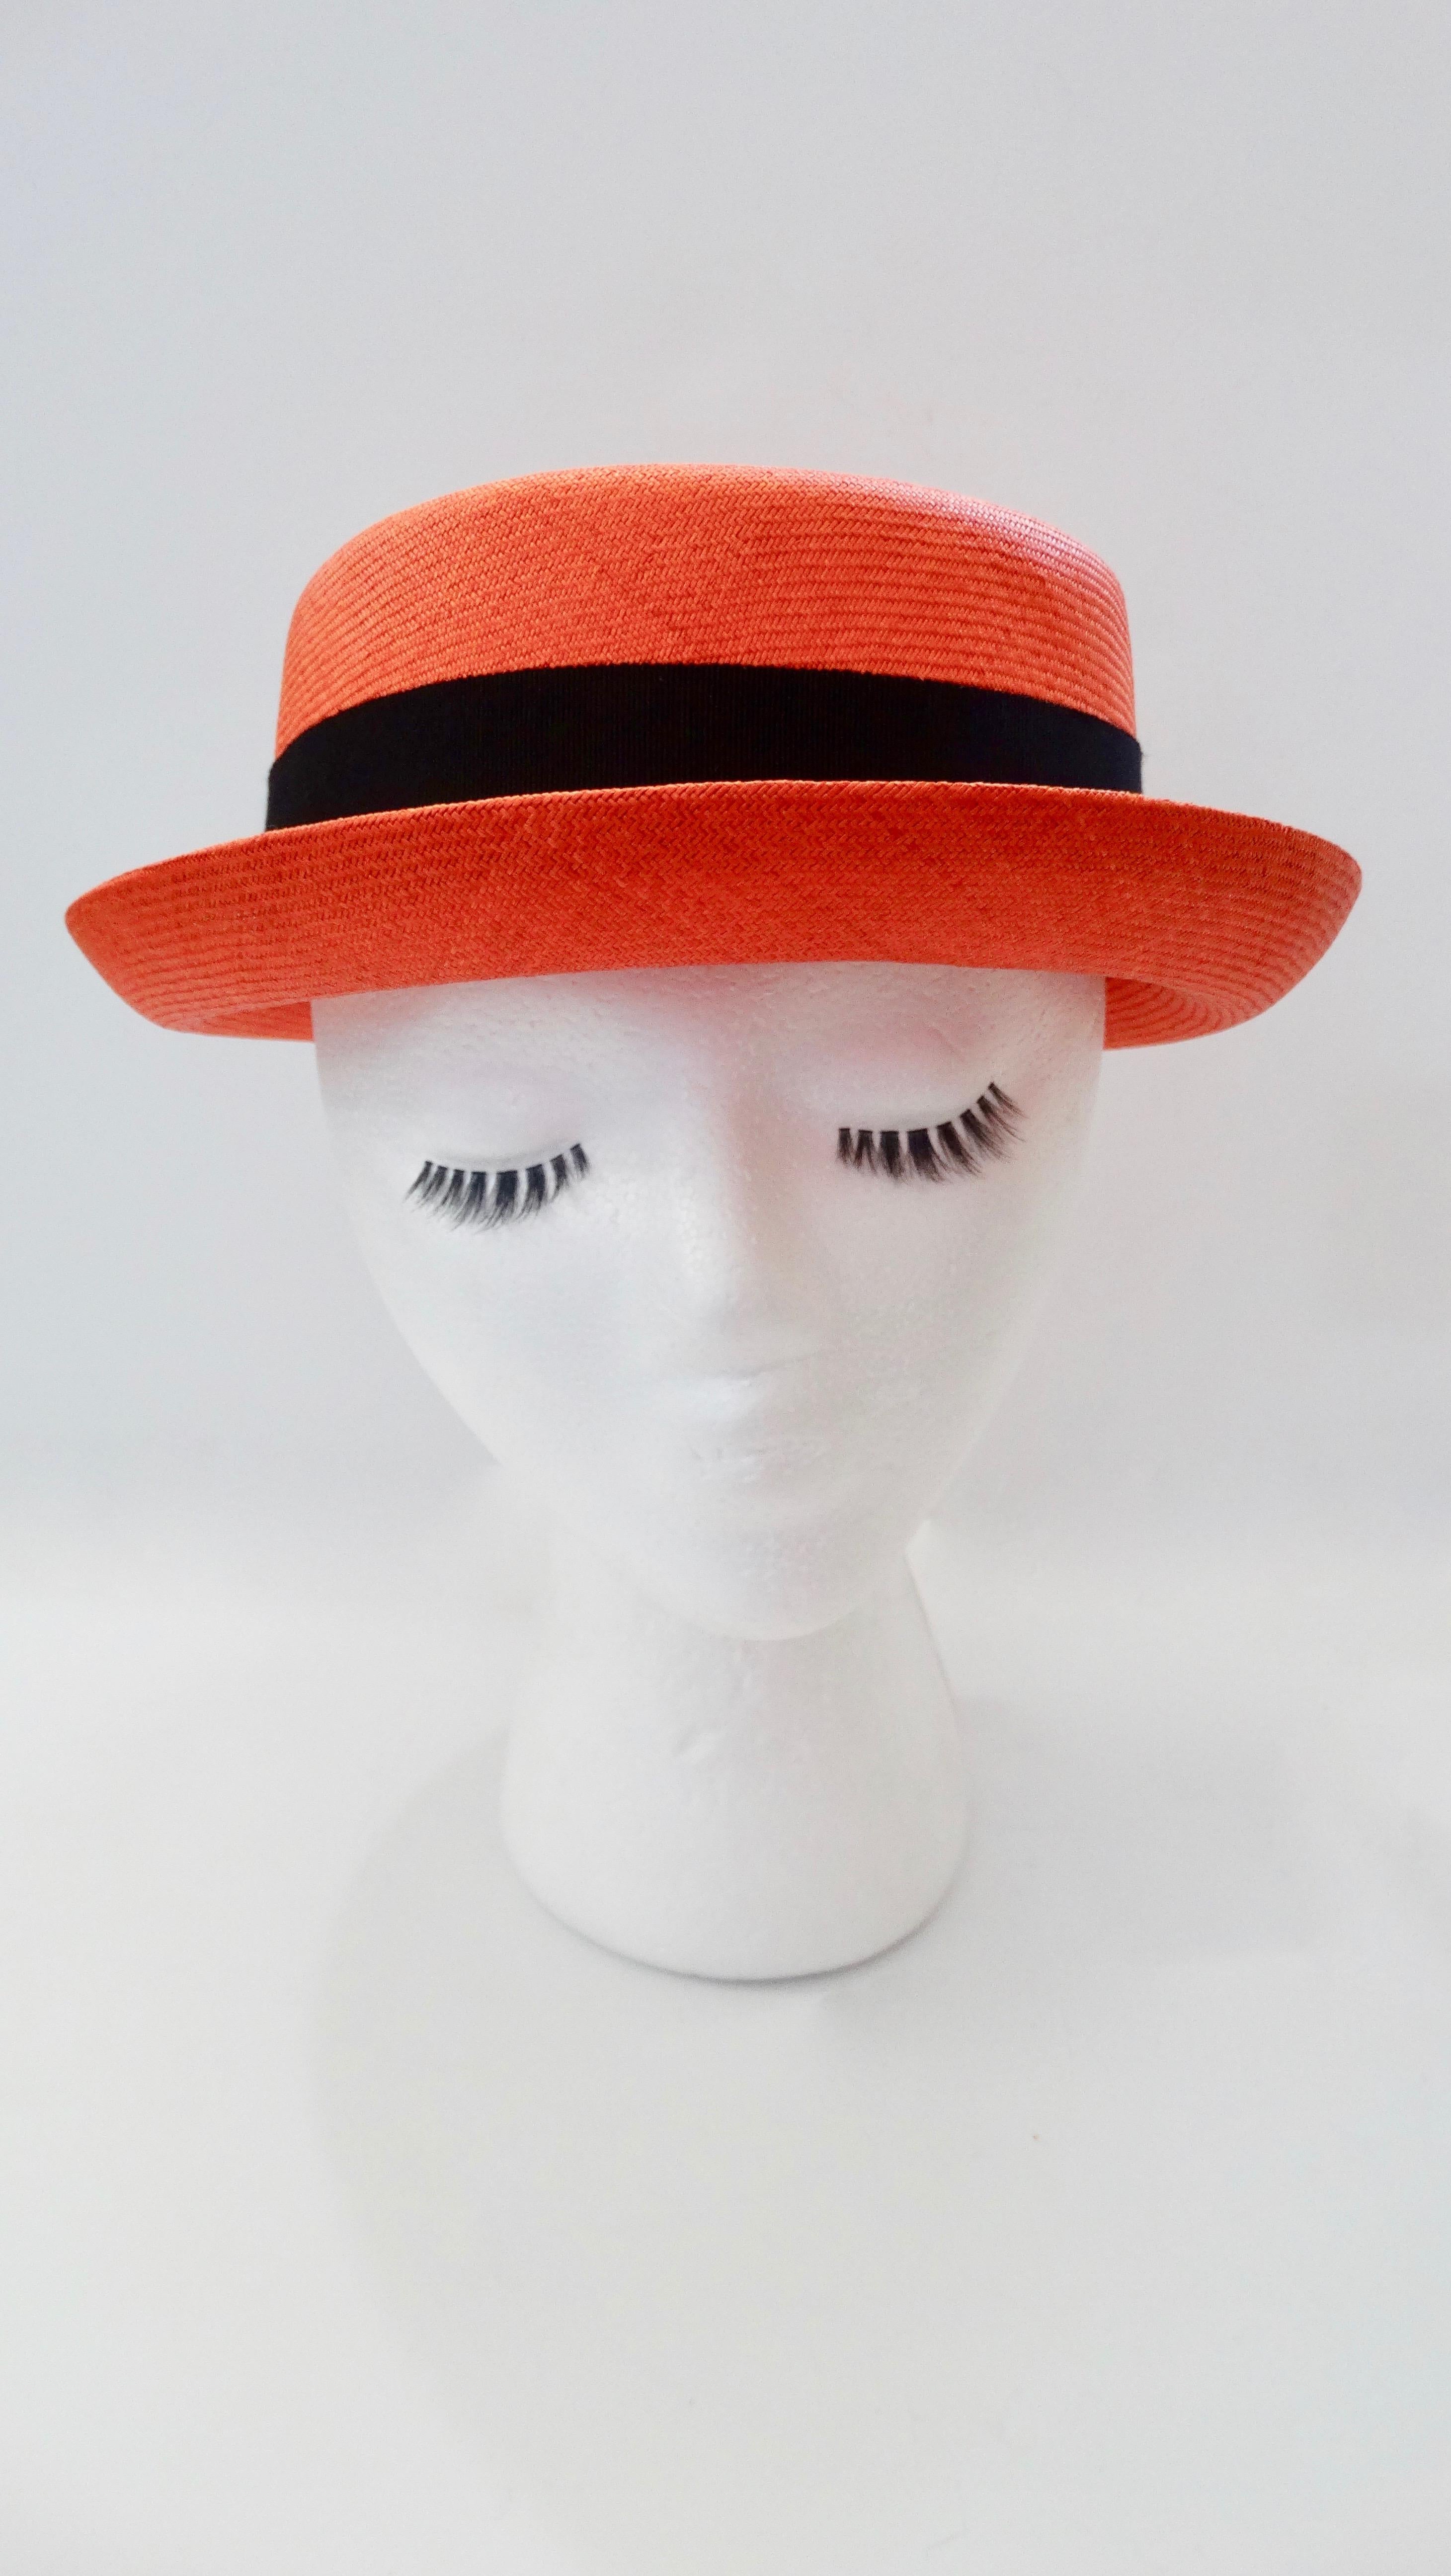 Treat yourself with a piece of Chanel! Circa 1990s, this boater hat is made of orange/red straw and features a black grosgrain ribbon around the base of the crown. From brunch to vacations, to lounging by the pool, this hat is perfect! Made in